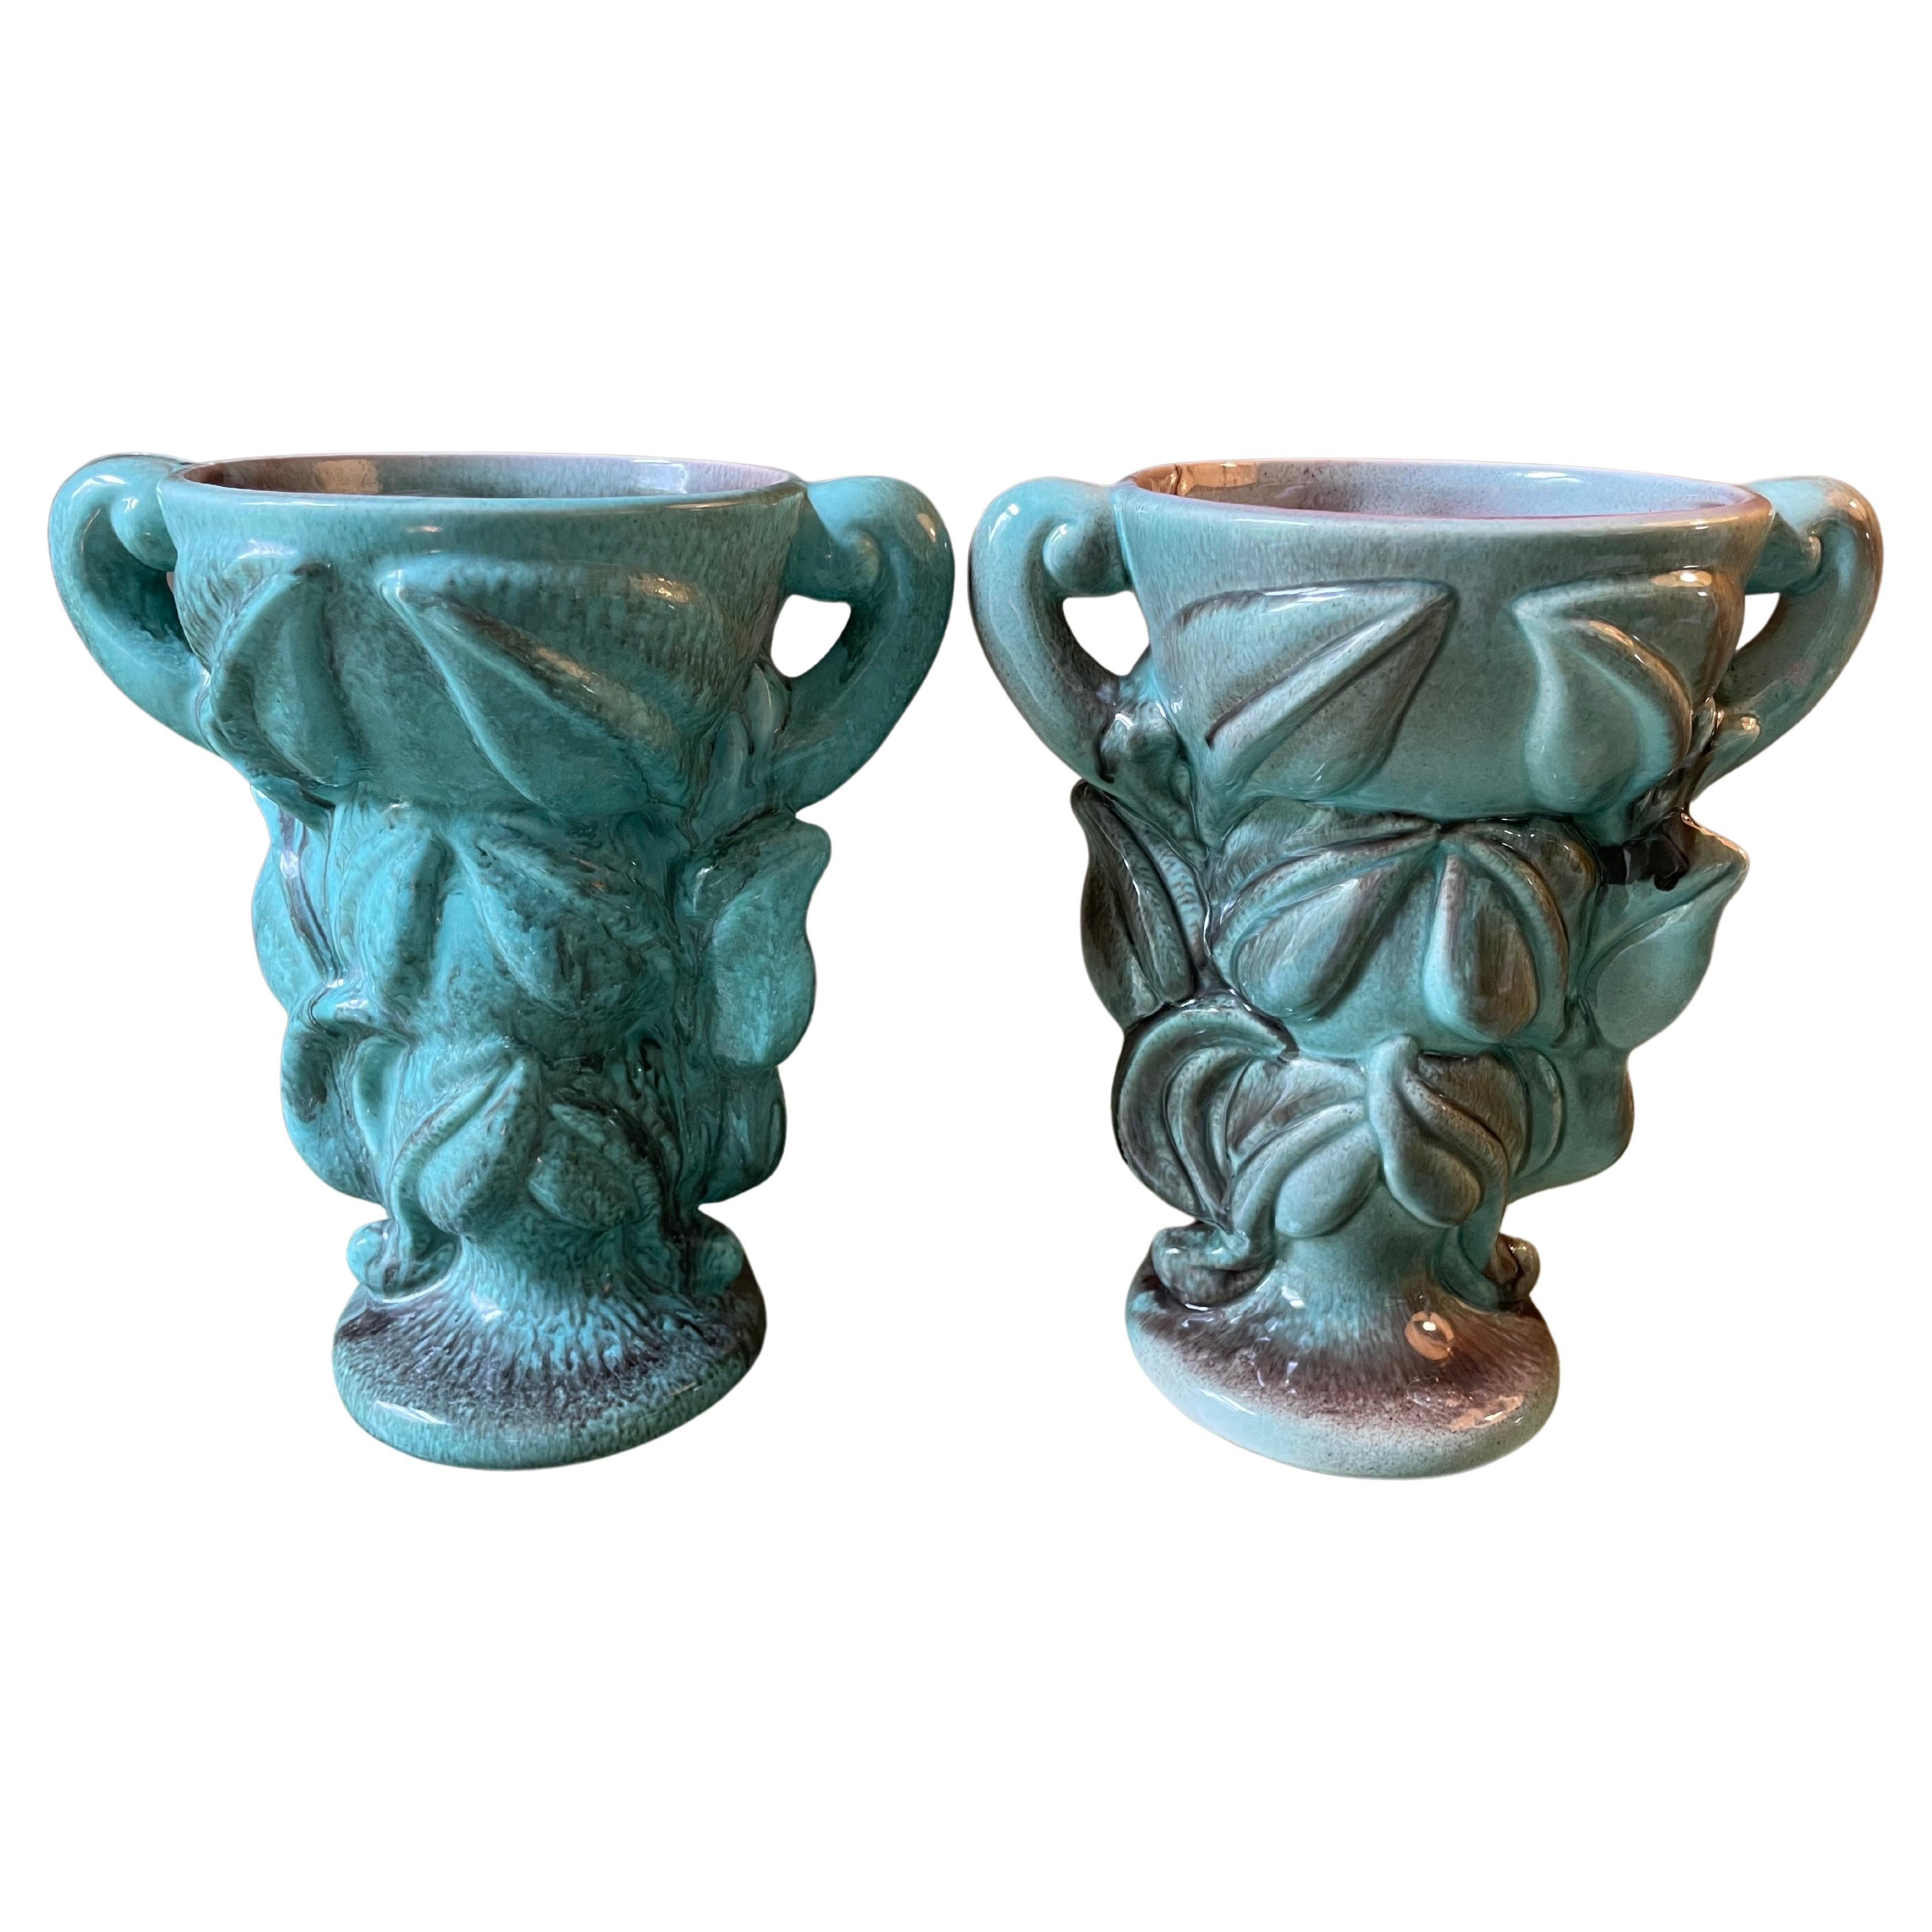 Pair of California Pottery Mid-Century Modern Vases by Gonder